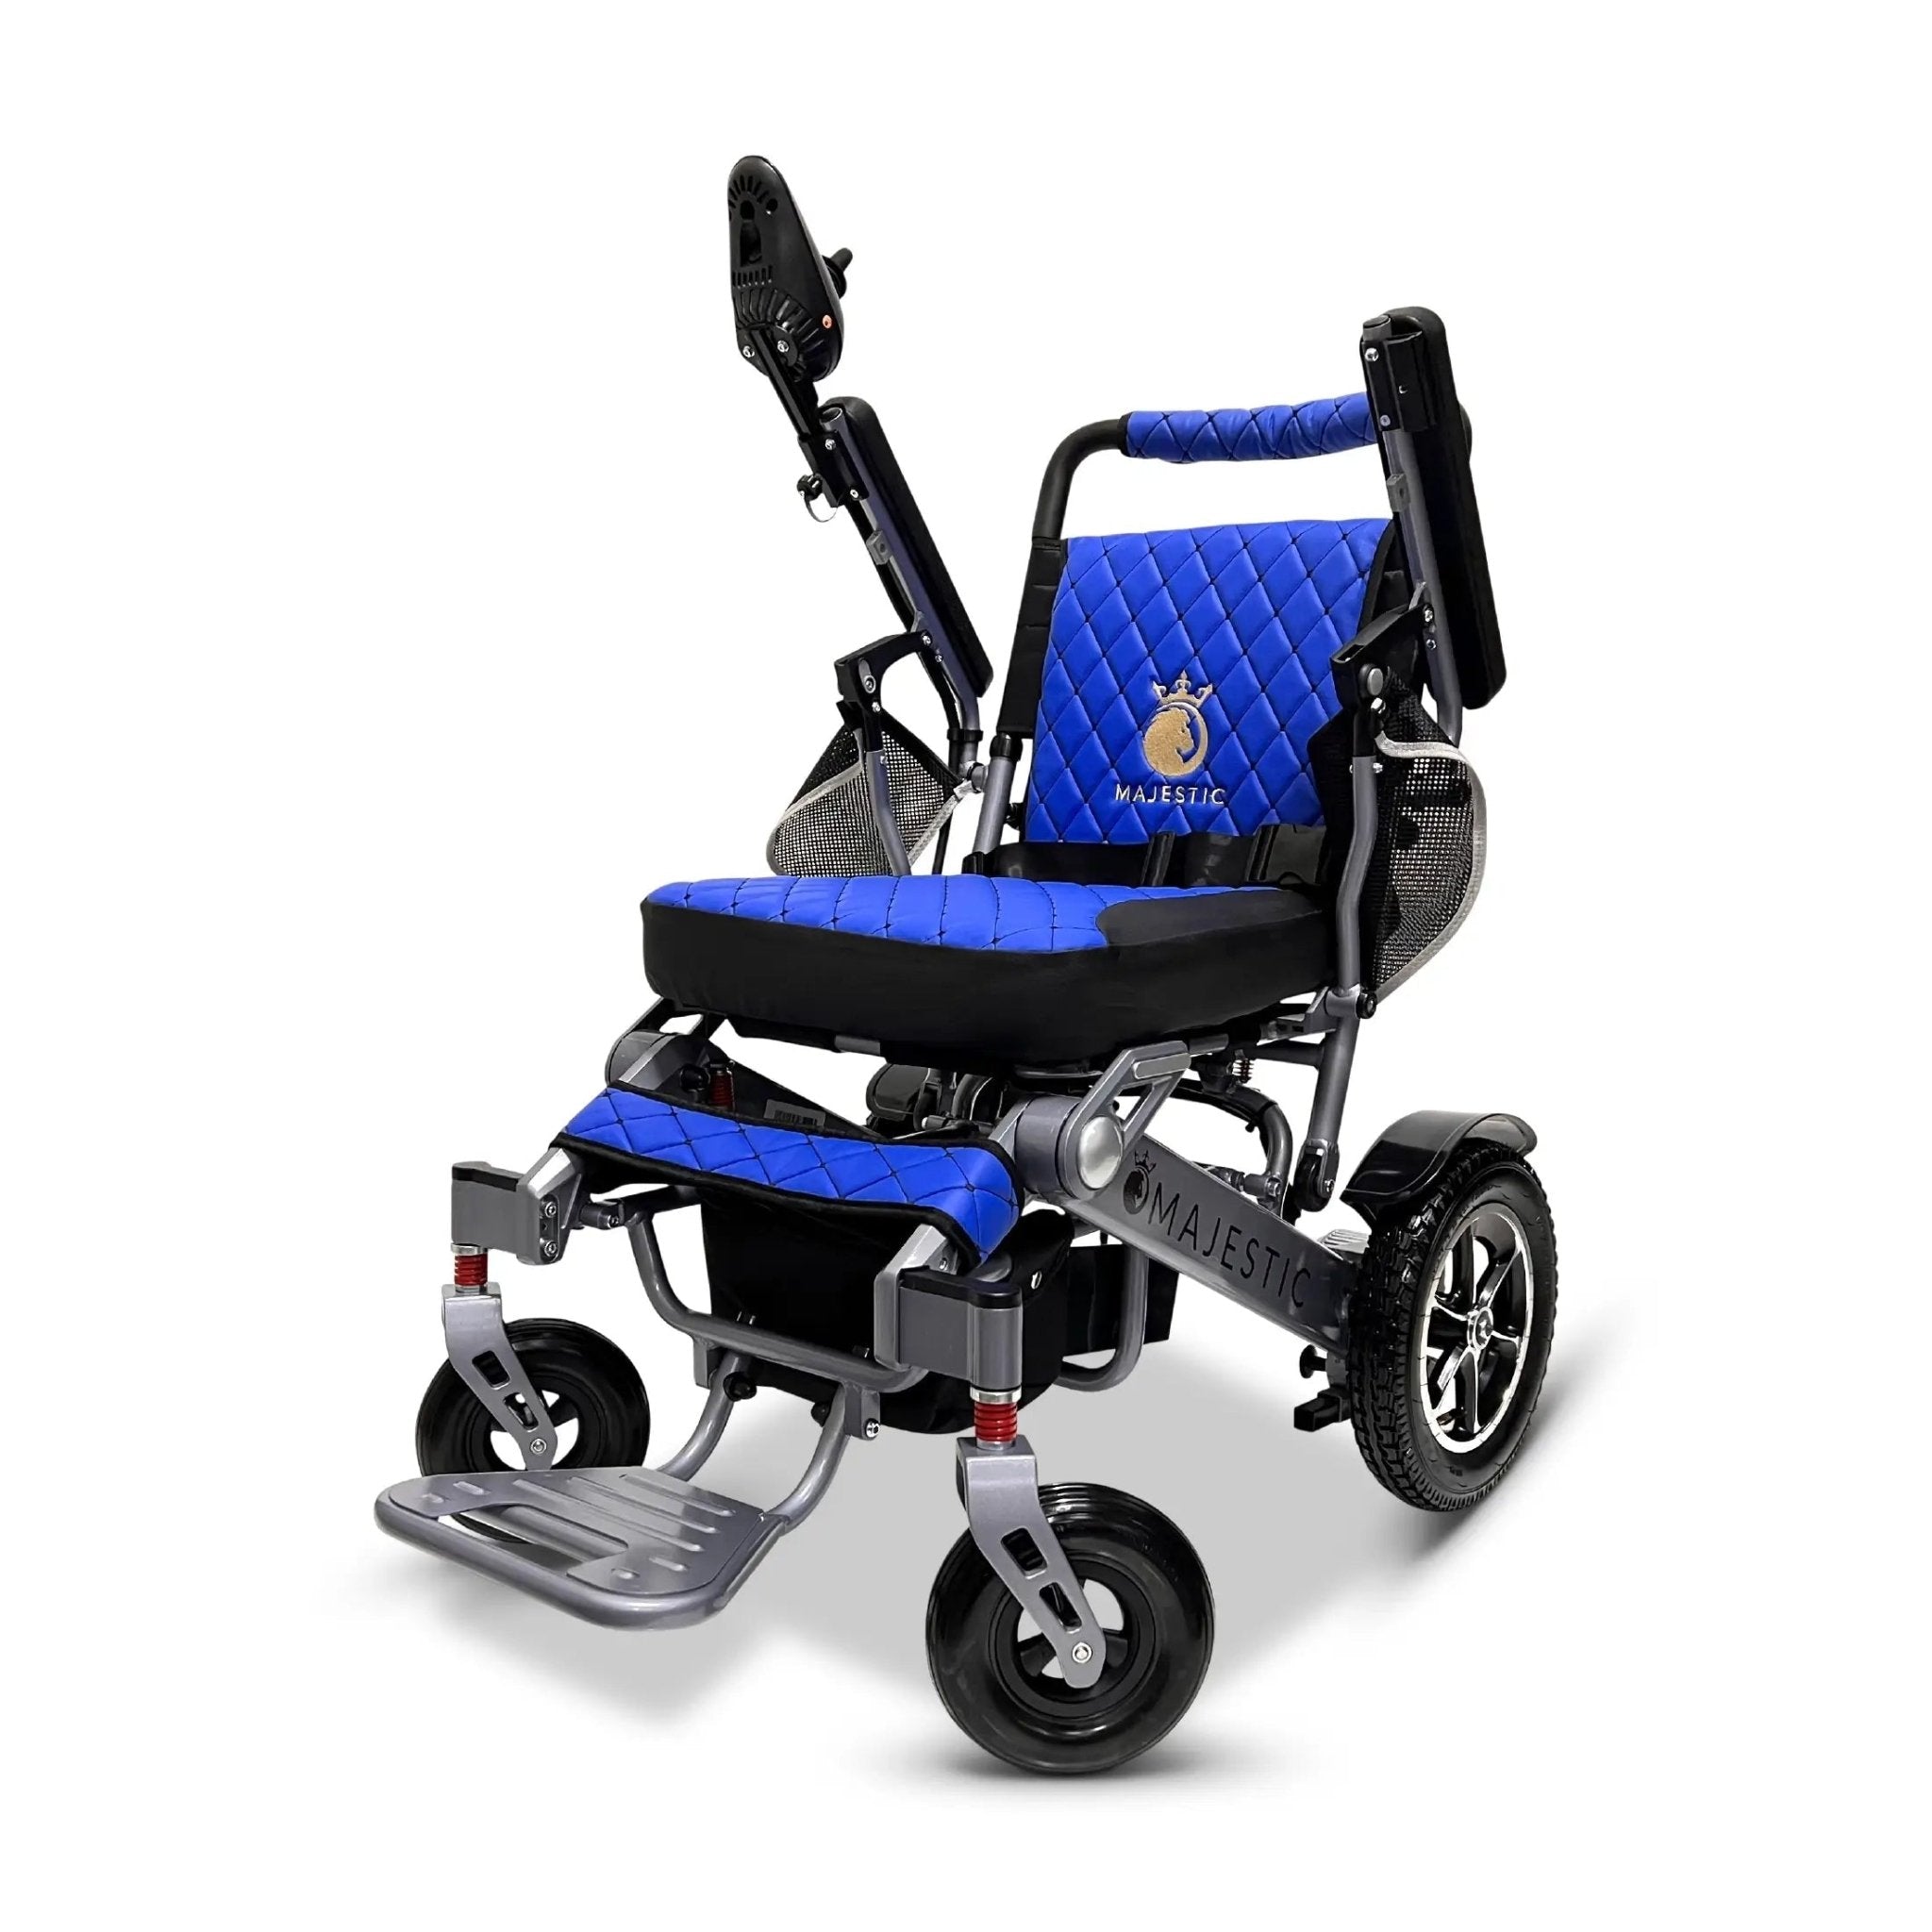 Majestic Auto Folding Remote-Controlled Electric Wheelchair IQ-7000 - Online Item - Midwest DME Supply